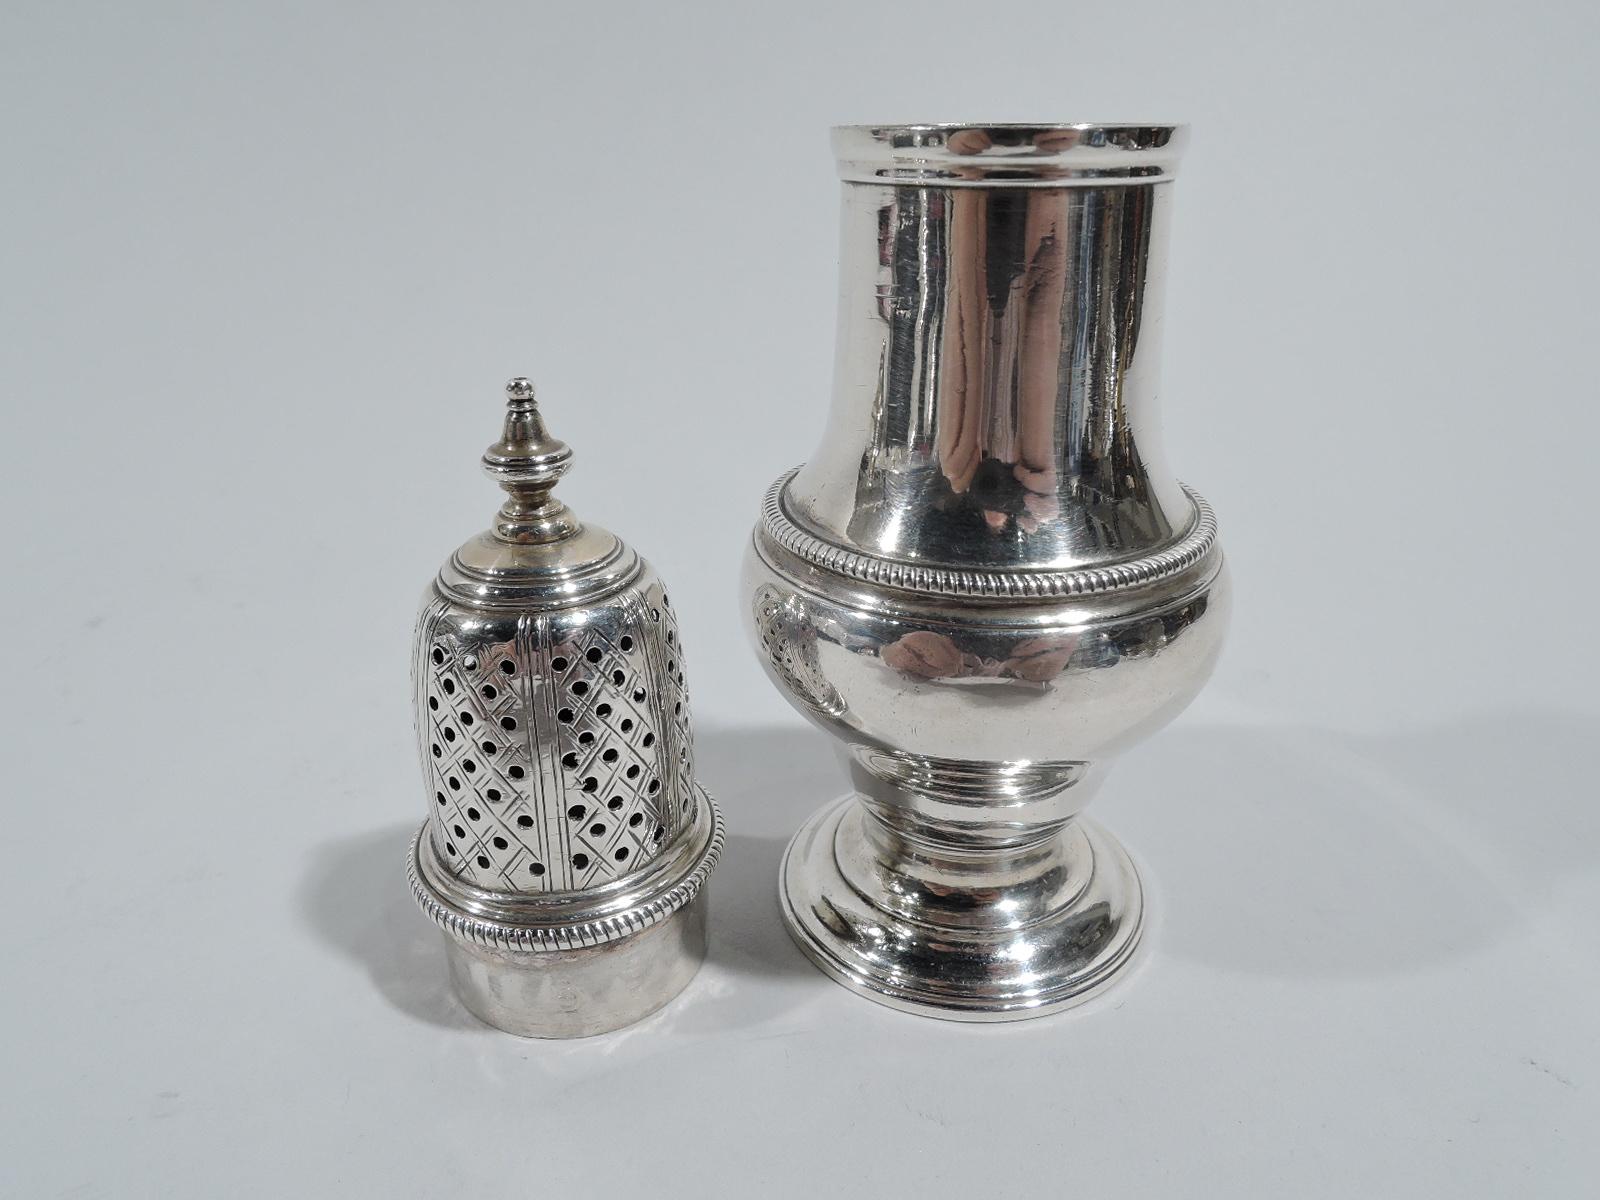 English Georgian sterling silver condiment shaker, late 18th century. Baluster on round and stepped foot. Cover pierced with engraved diaper and vasiform finial. Gadrooning. Body marks include London assay stamp, 1788 date later, and unidentified